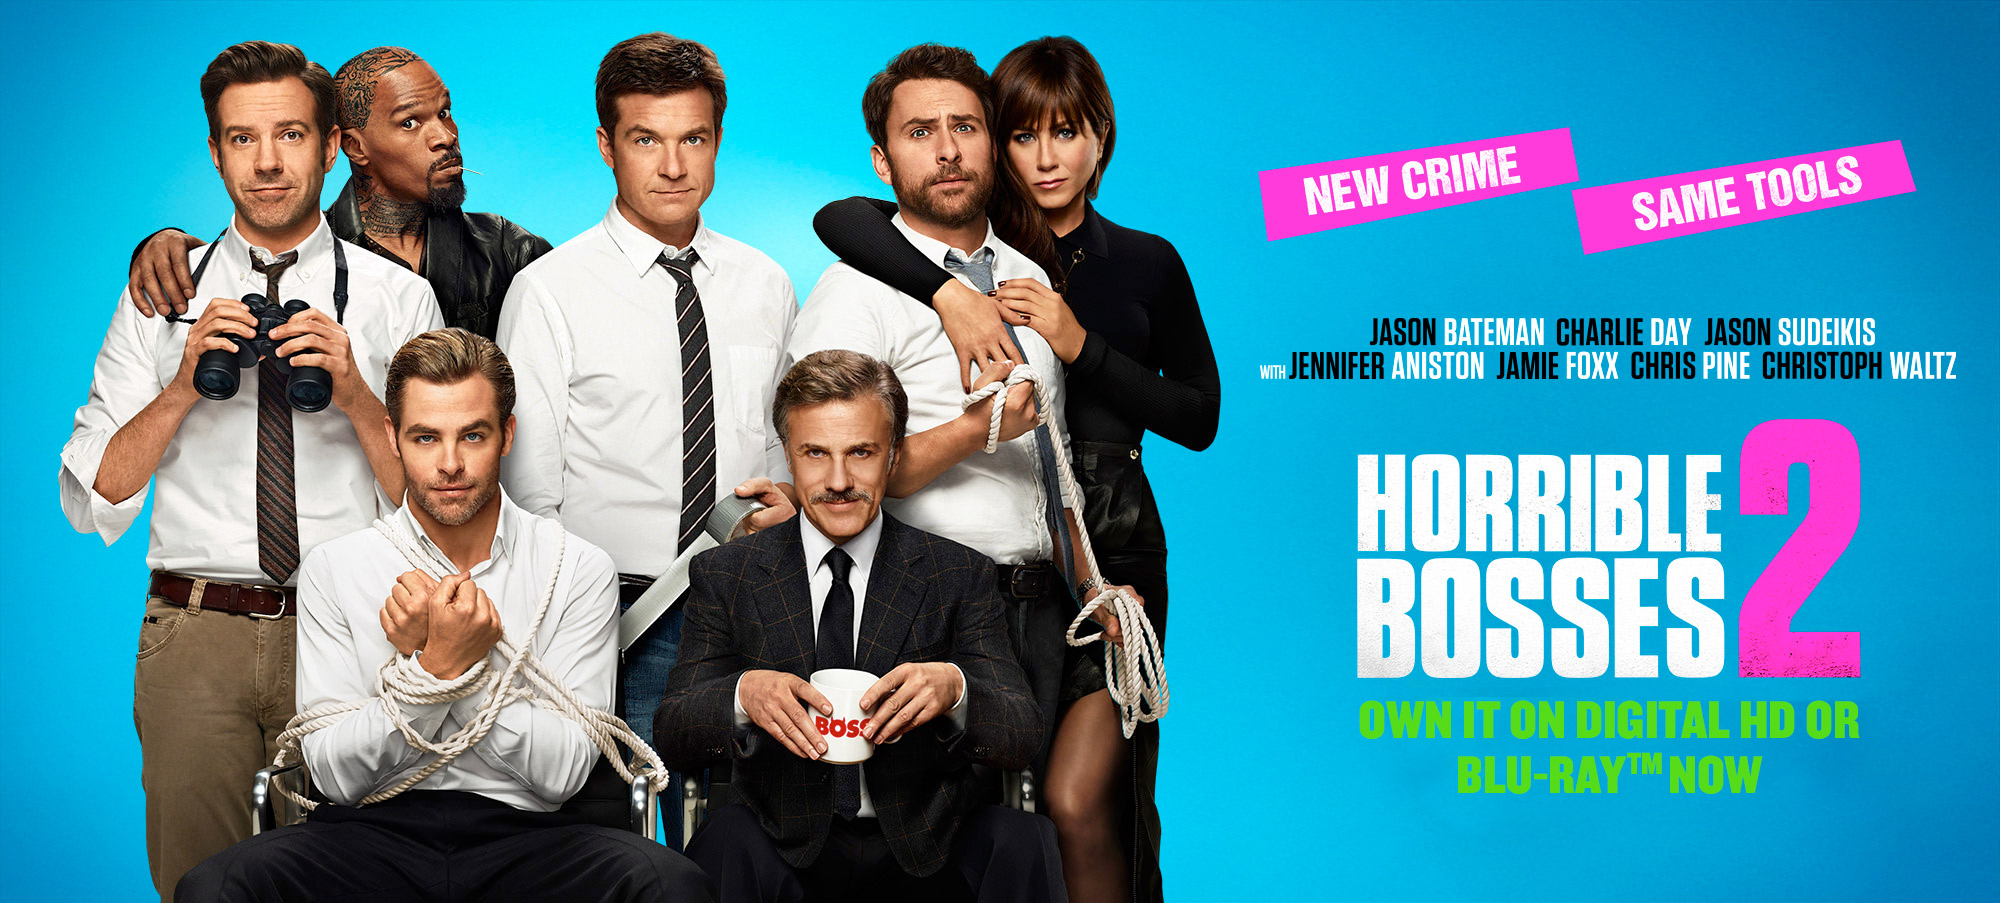 Nice Images Collection: Horrible Bosses Desktop Wallpapers